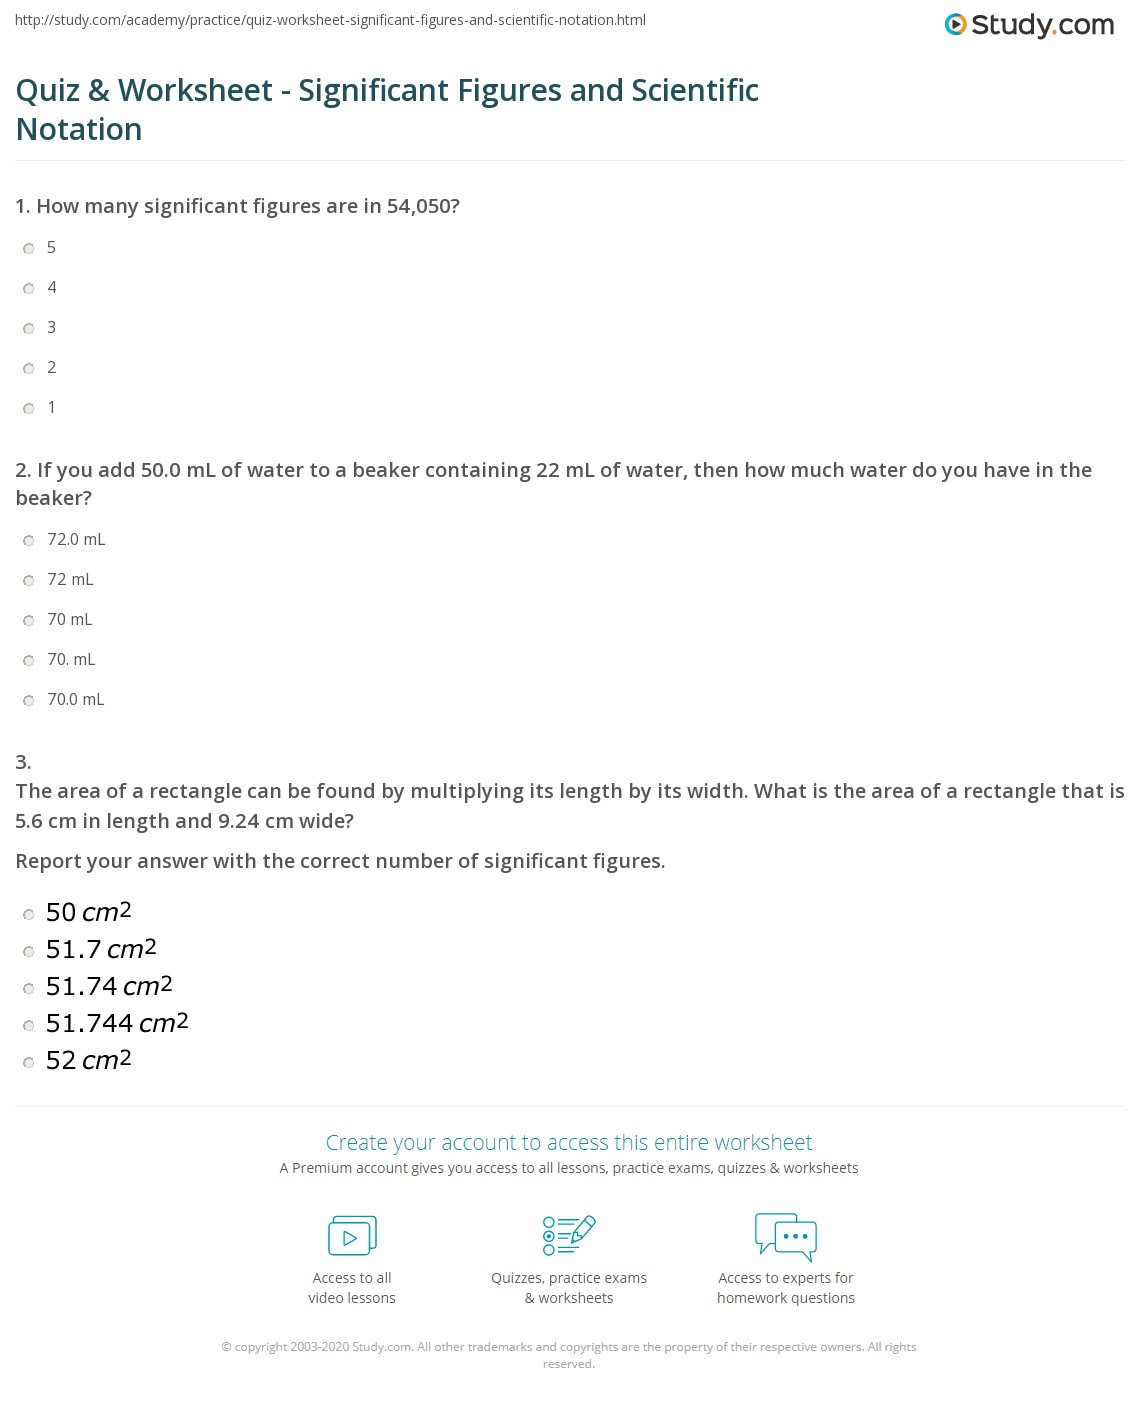 Scientific Notation Worksheet Chemistry Quiz &amp; Worksheet Significant Figures and Scientific